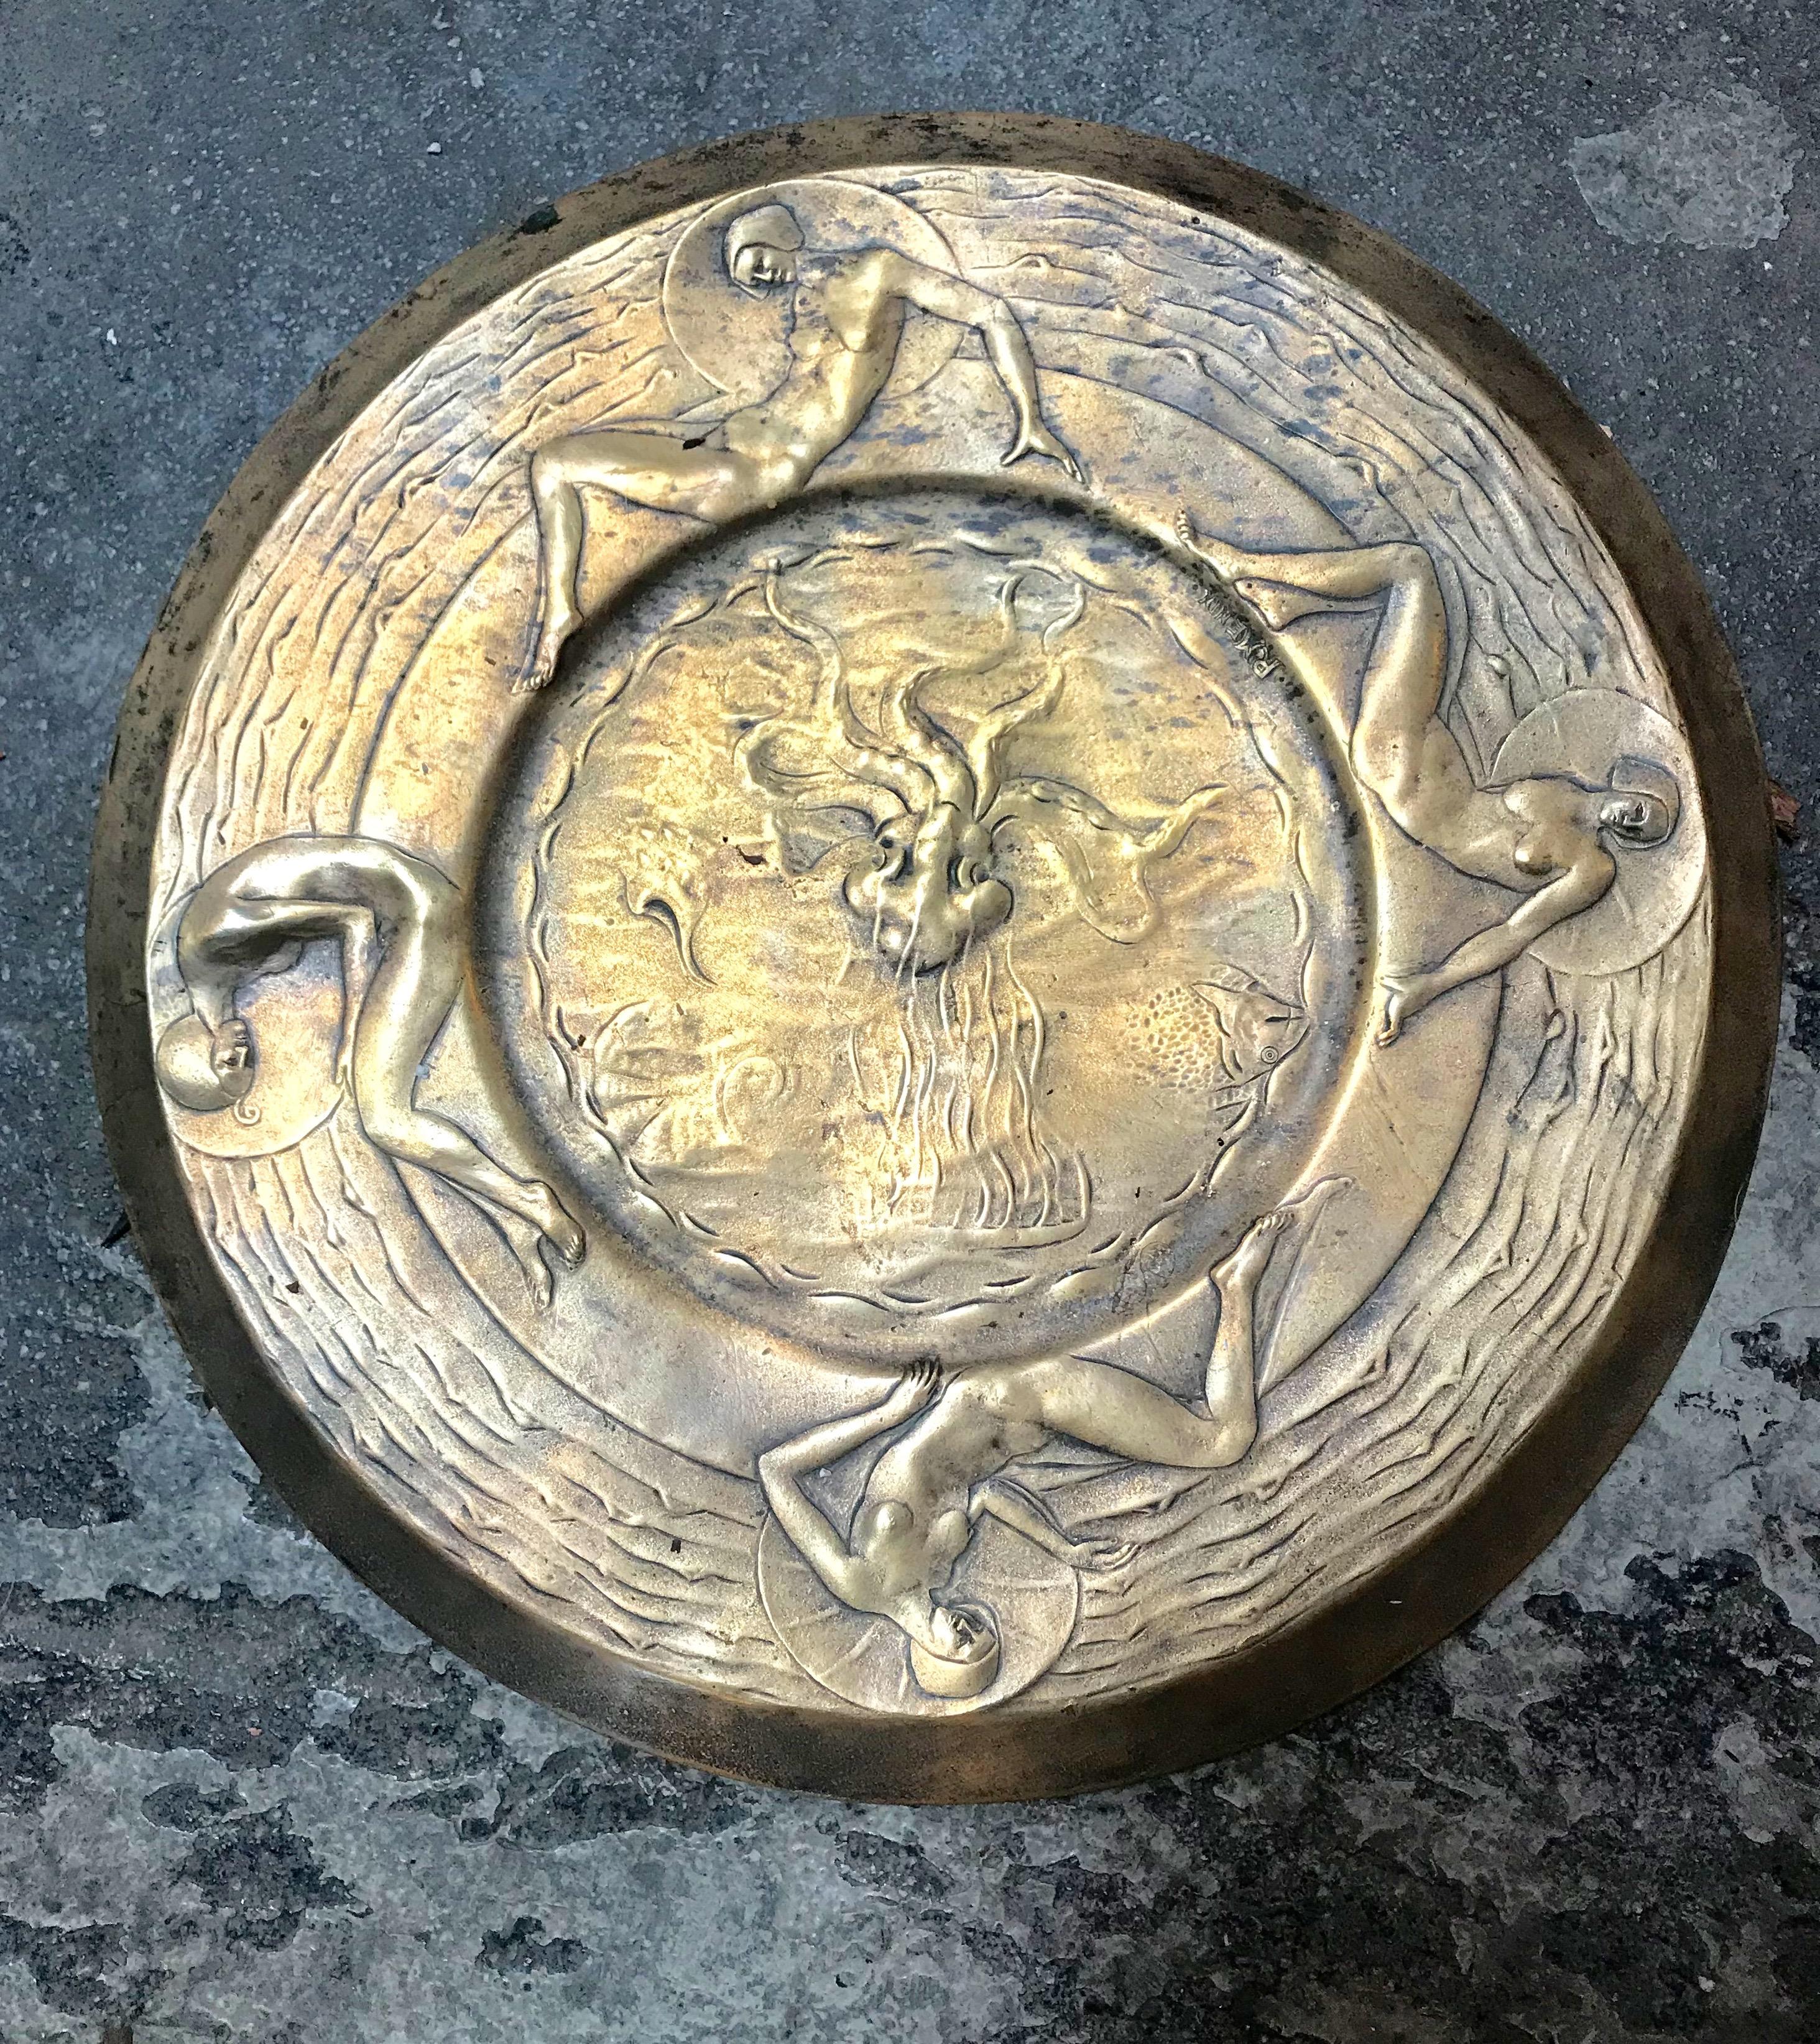 Rare Italian Art Deco handcrafted Medallion signed R.Menon, 1930s
The bronze medallion is in wonderful condition with a pleasant patina all adding to the aged charm and character of the piece.
It has a traditional rounded form, decorated